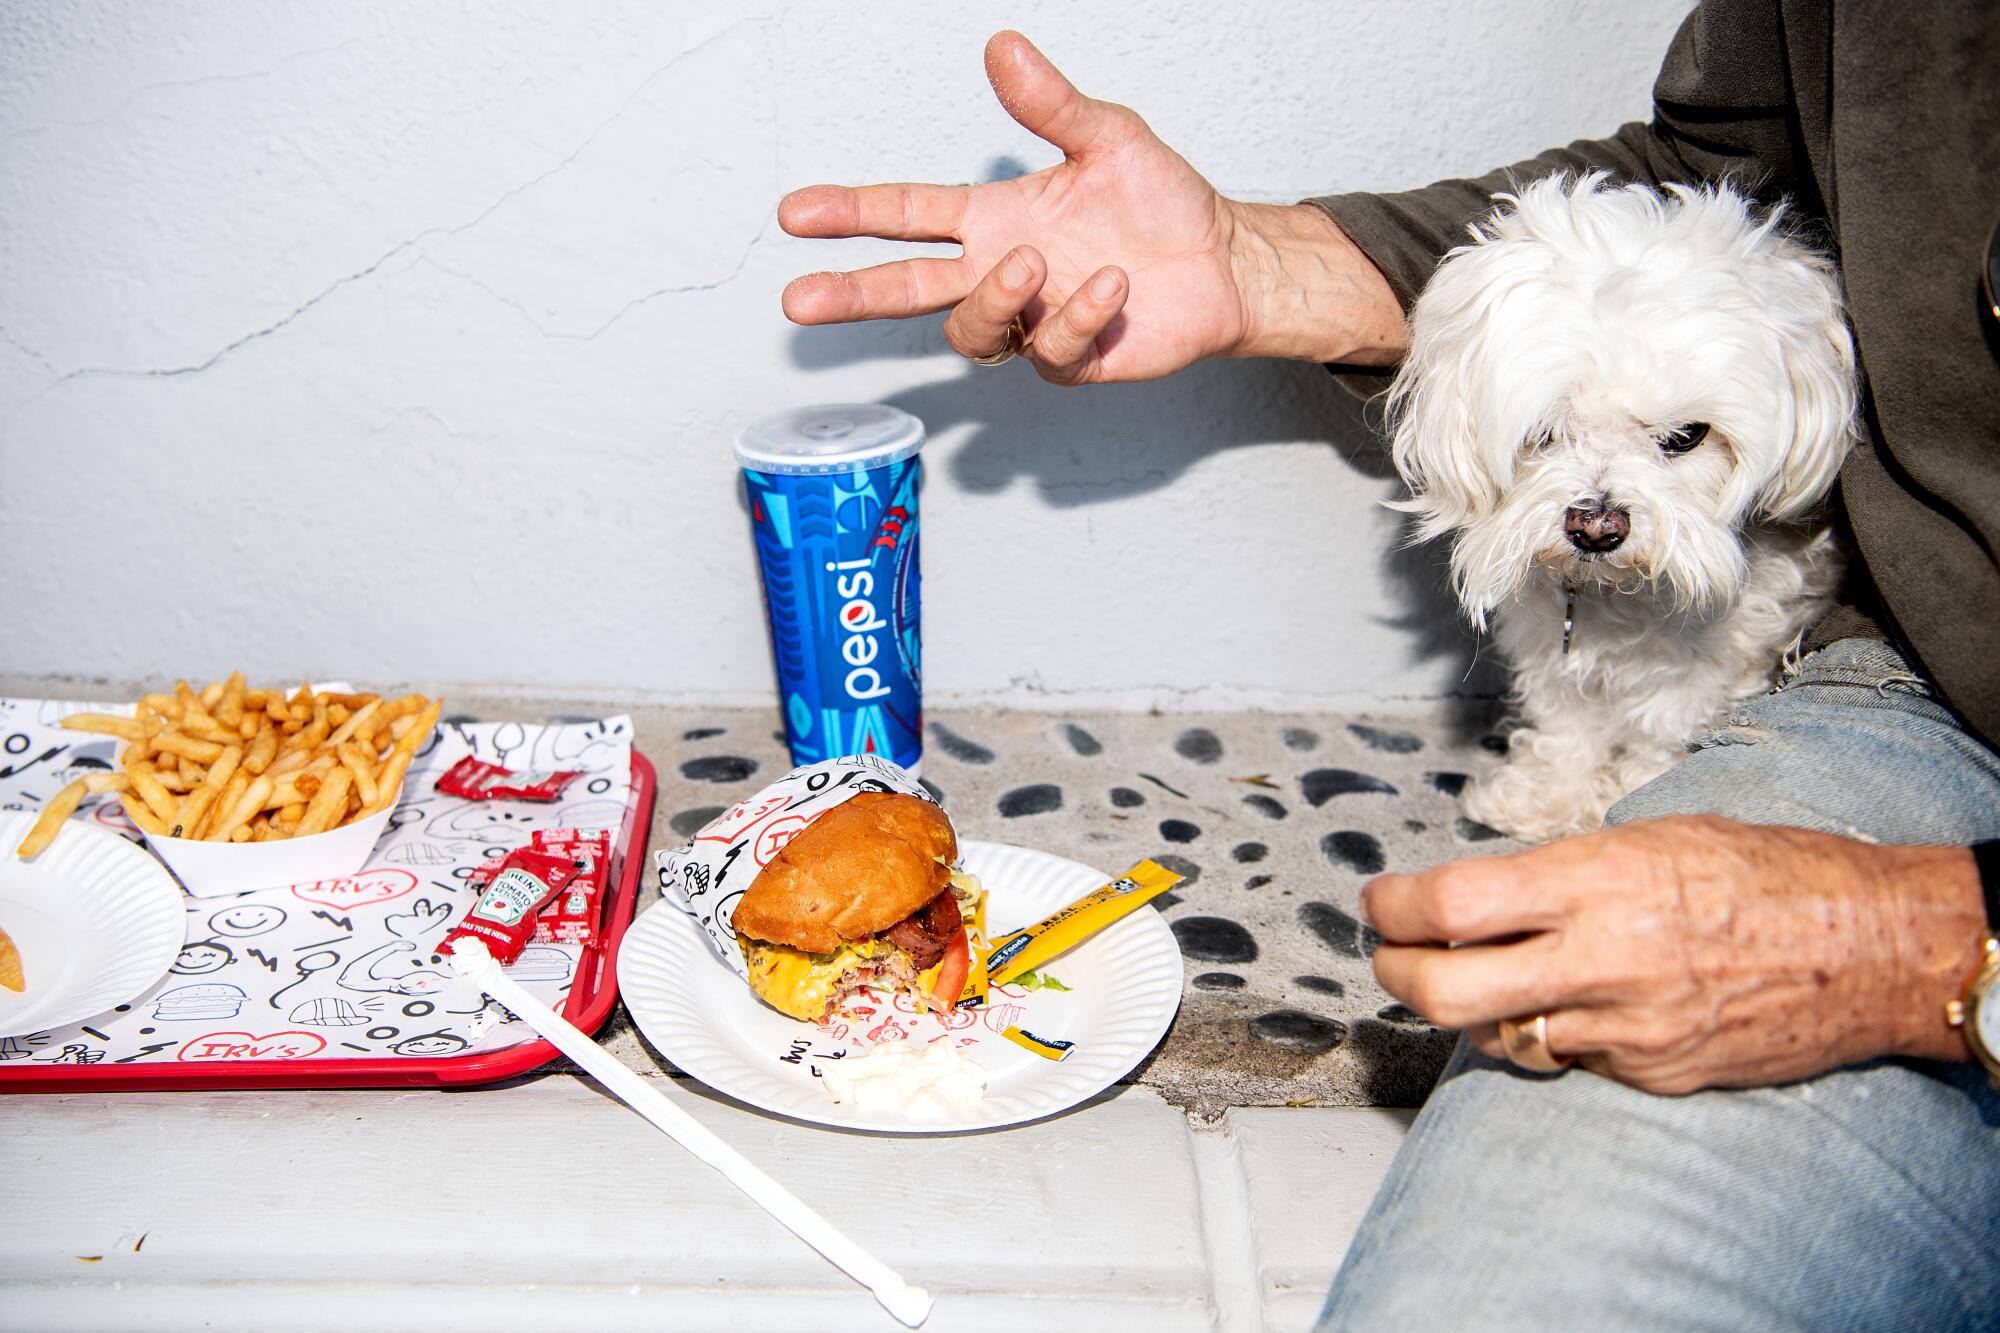 A small white dog sits next to its owner, who gestures at a meal of burger, fries and soft drink